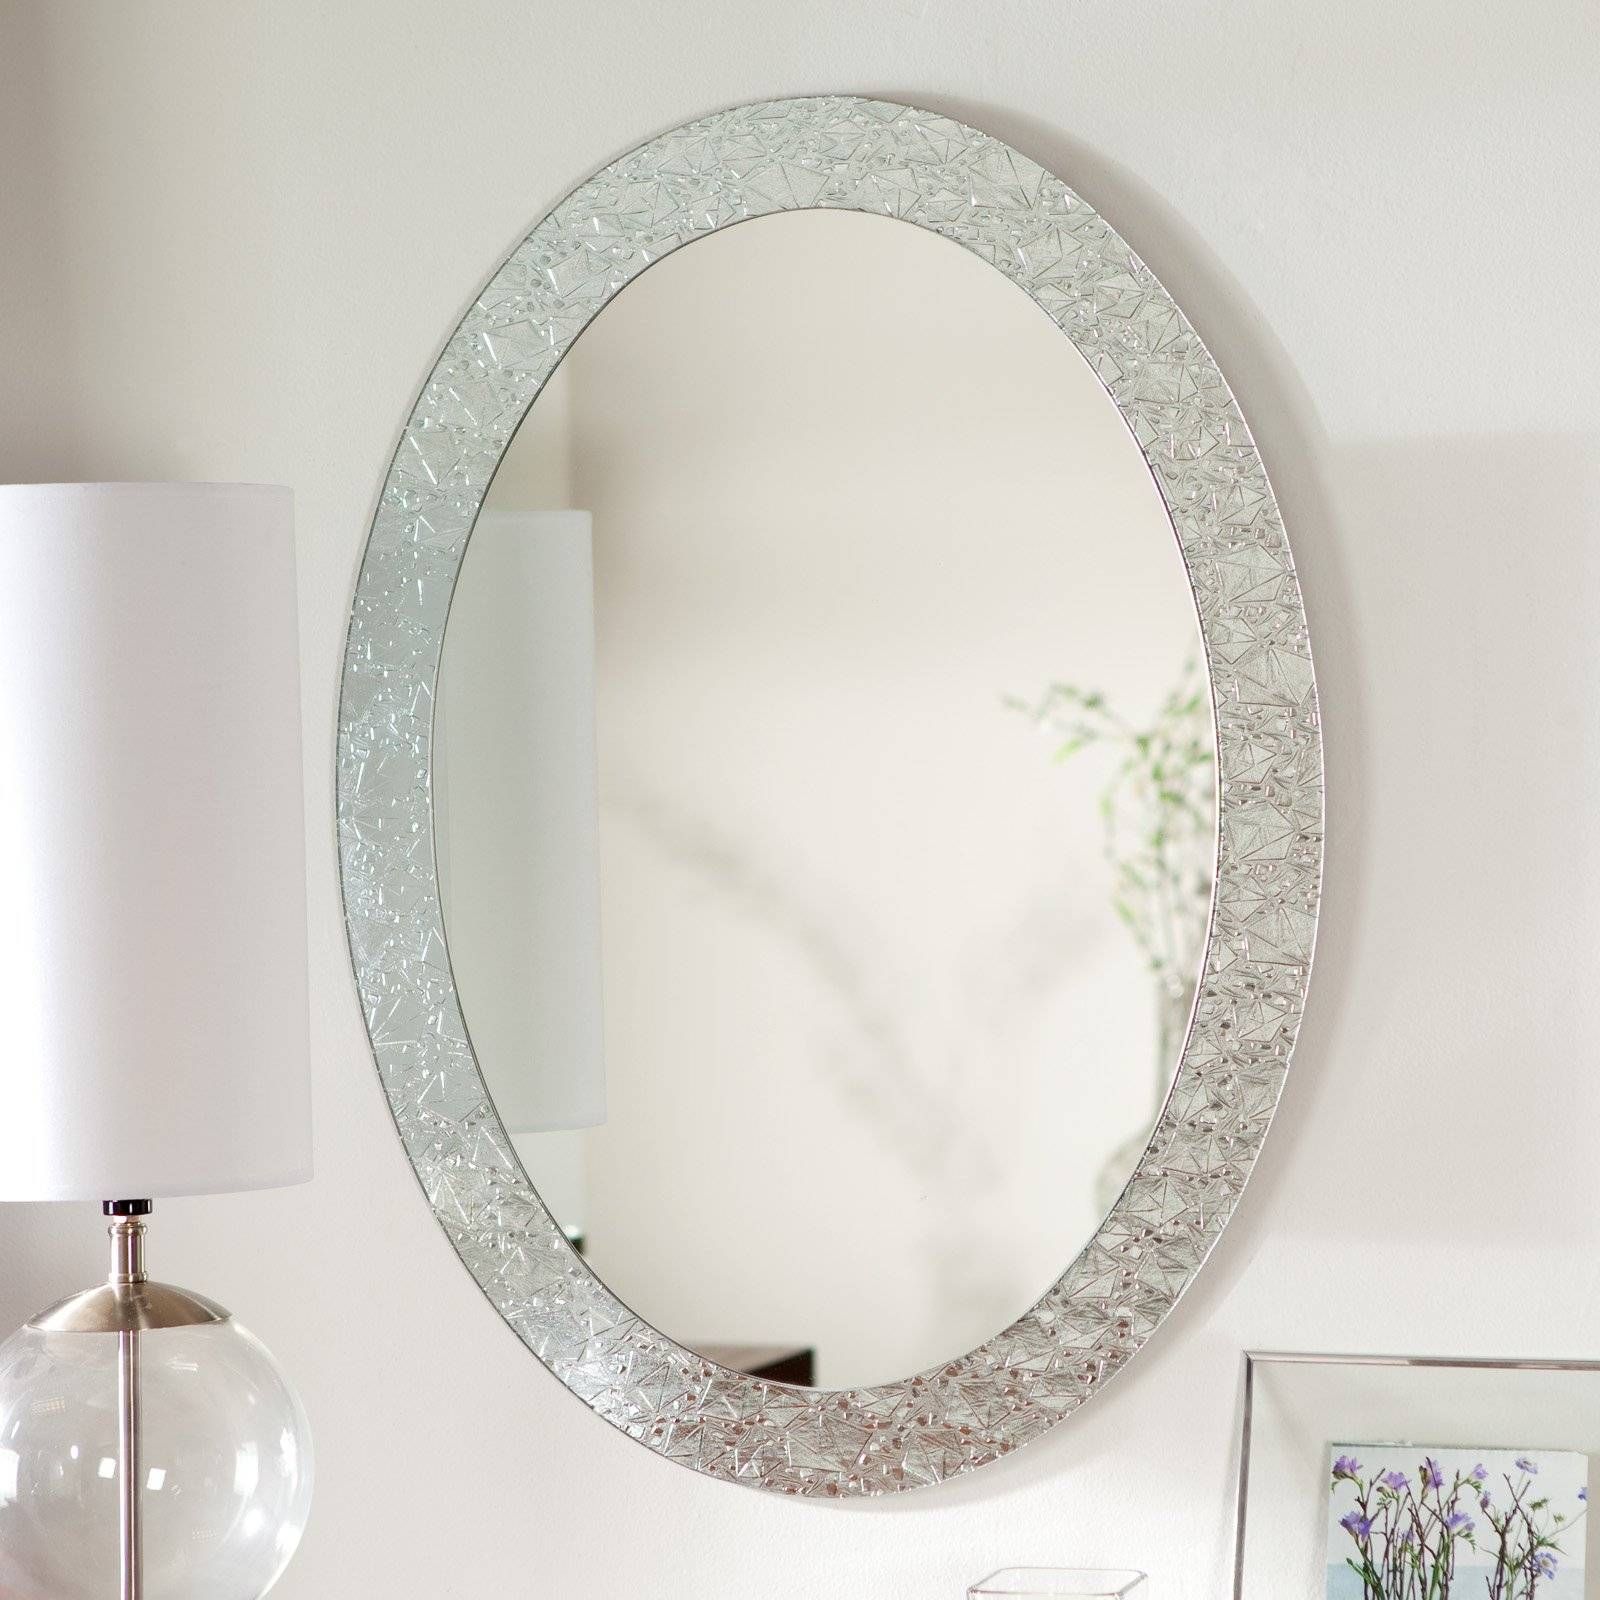 Bathroom: Bronze Framed Mirror | Oval Mirrors For Bathroom | Oval With Regard To Large Oval Wall Mirrors (View 8 of 15)